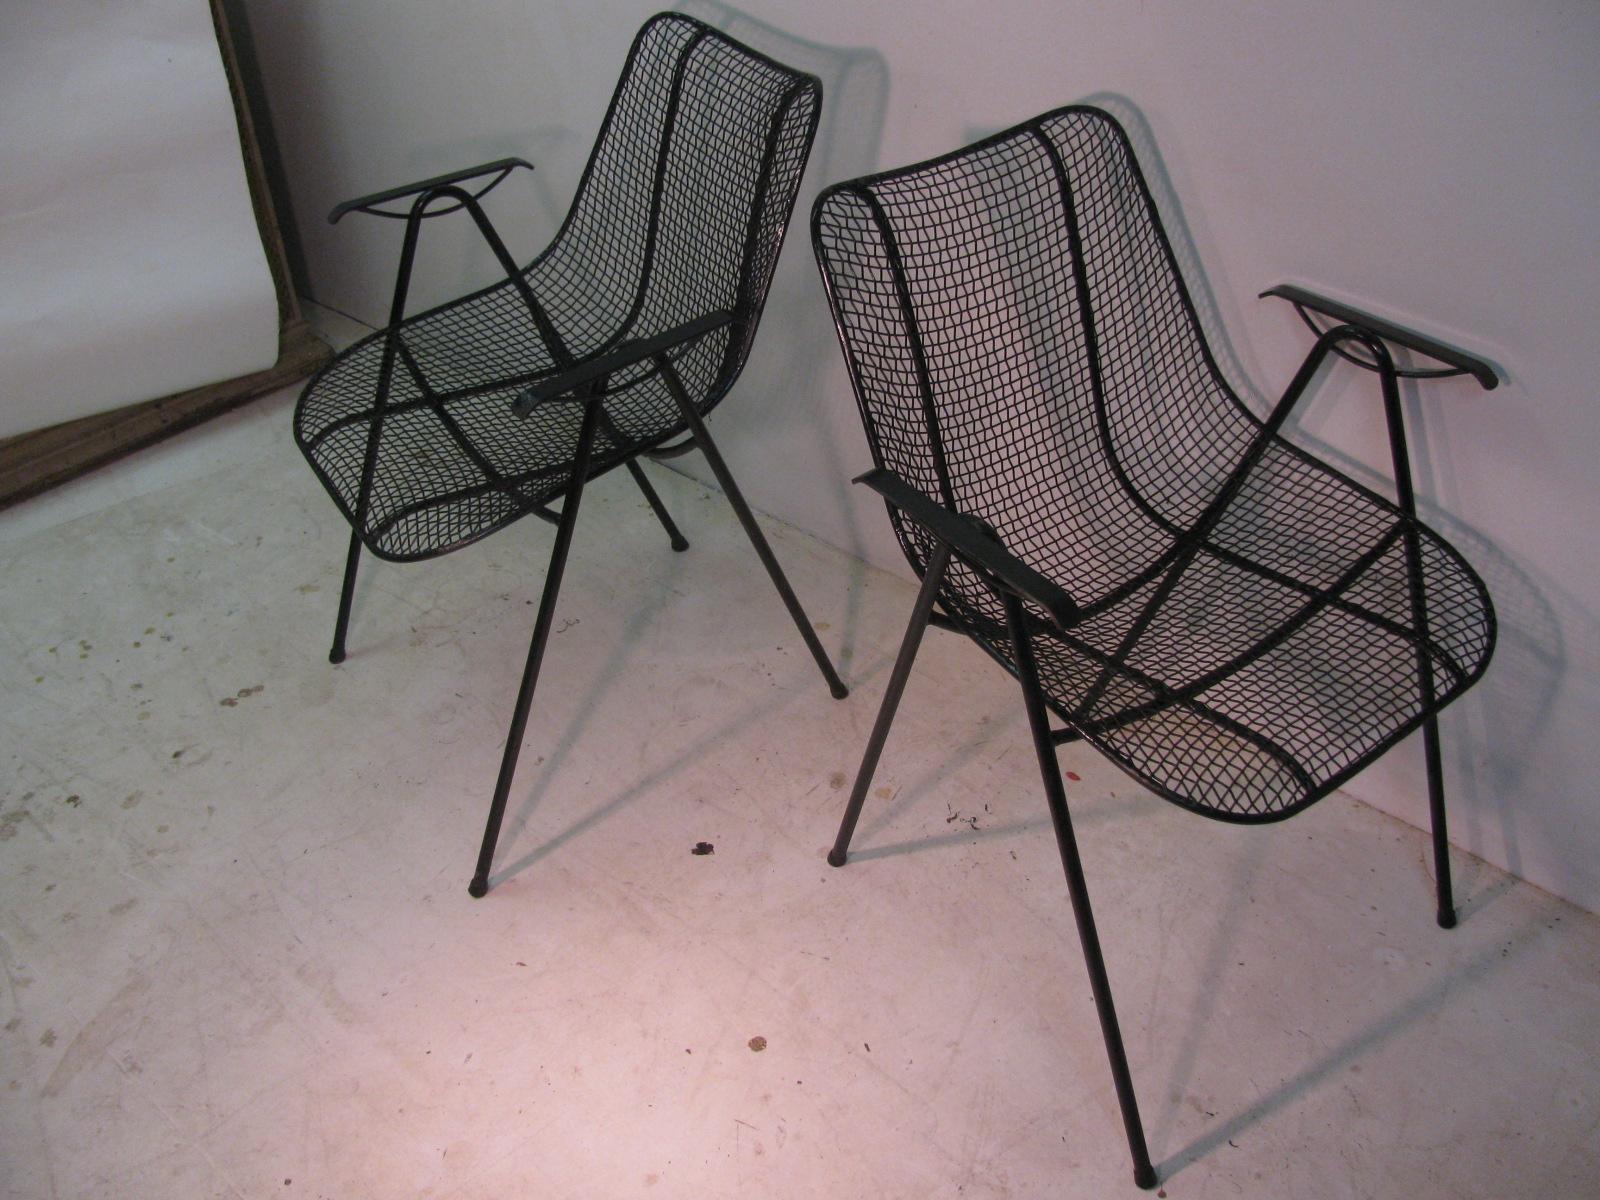 Fabulous set of eight Russell Woodard sculptura wire mesh chairs with armrests. Rare set, not very common. Very comfortable and in excellent condition, freshly sprayed black. Two chairs have ball feet which raise the height to 33in. and the seat